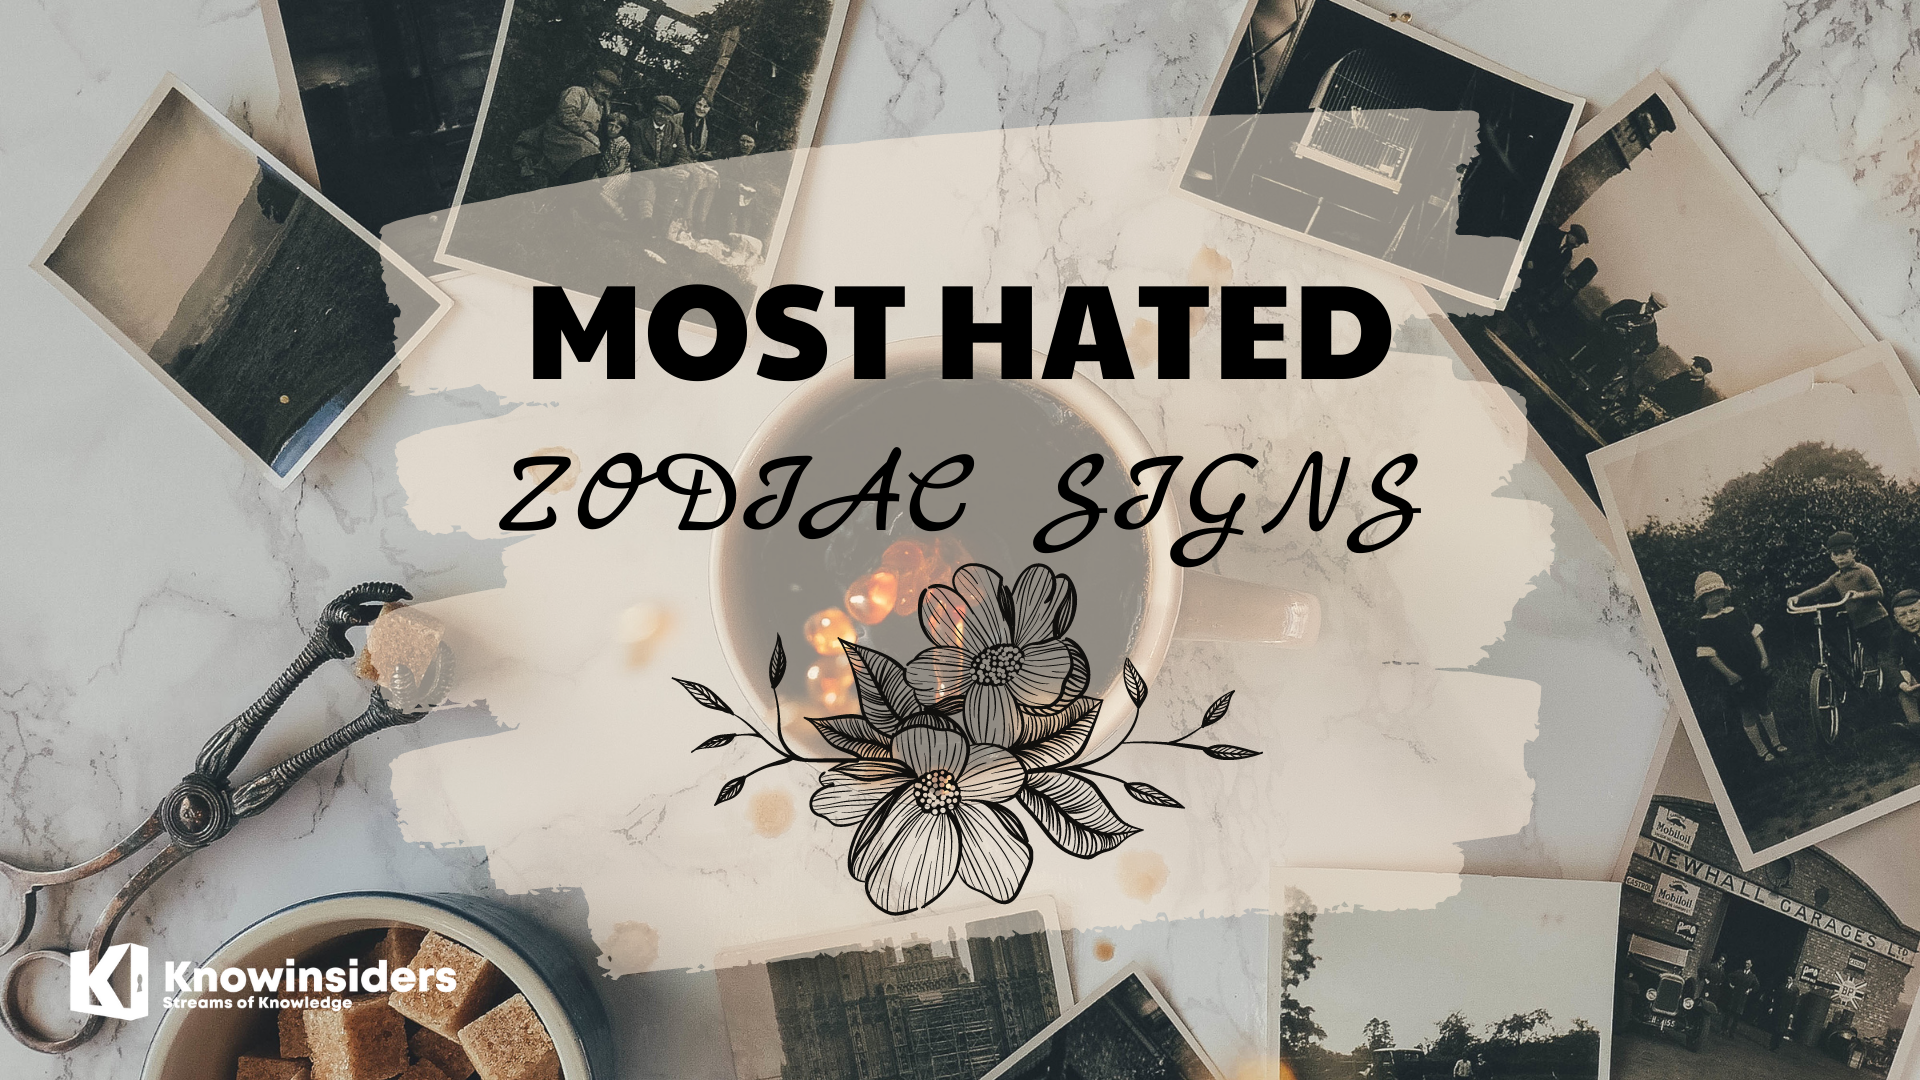 Top 5 Most Hated Zodiac Signs According to Astrology